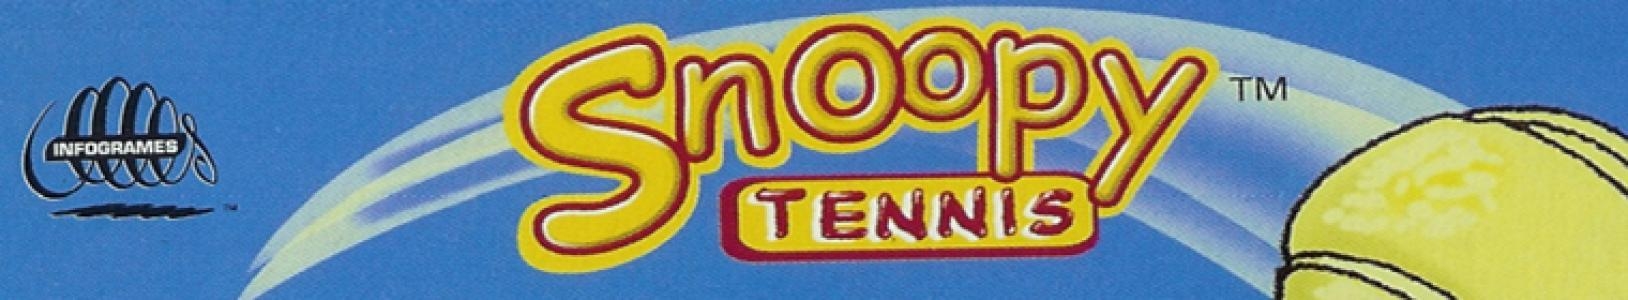 Snoopy Tennis banner